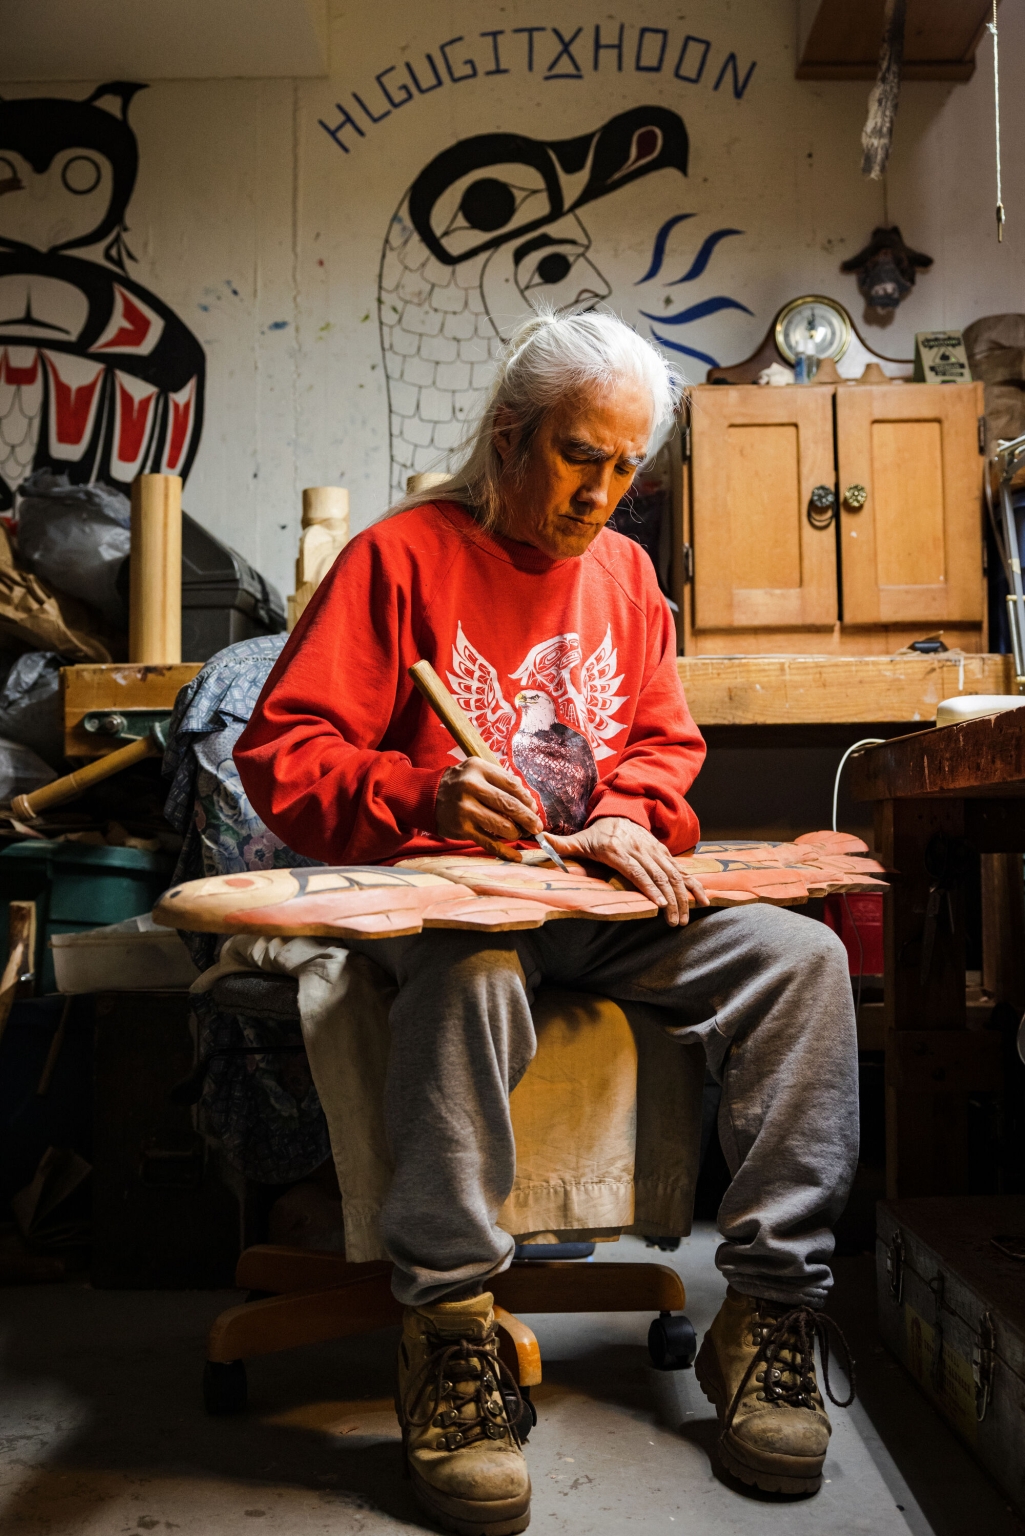 An Indigenous artist in a red sweatshirt sits in a chair in what looks to be his workshop working on a long, flat carving.